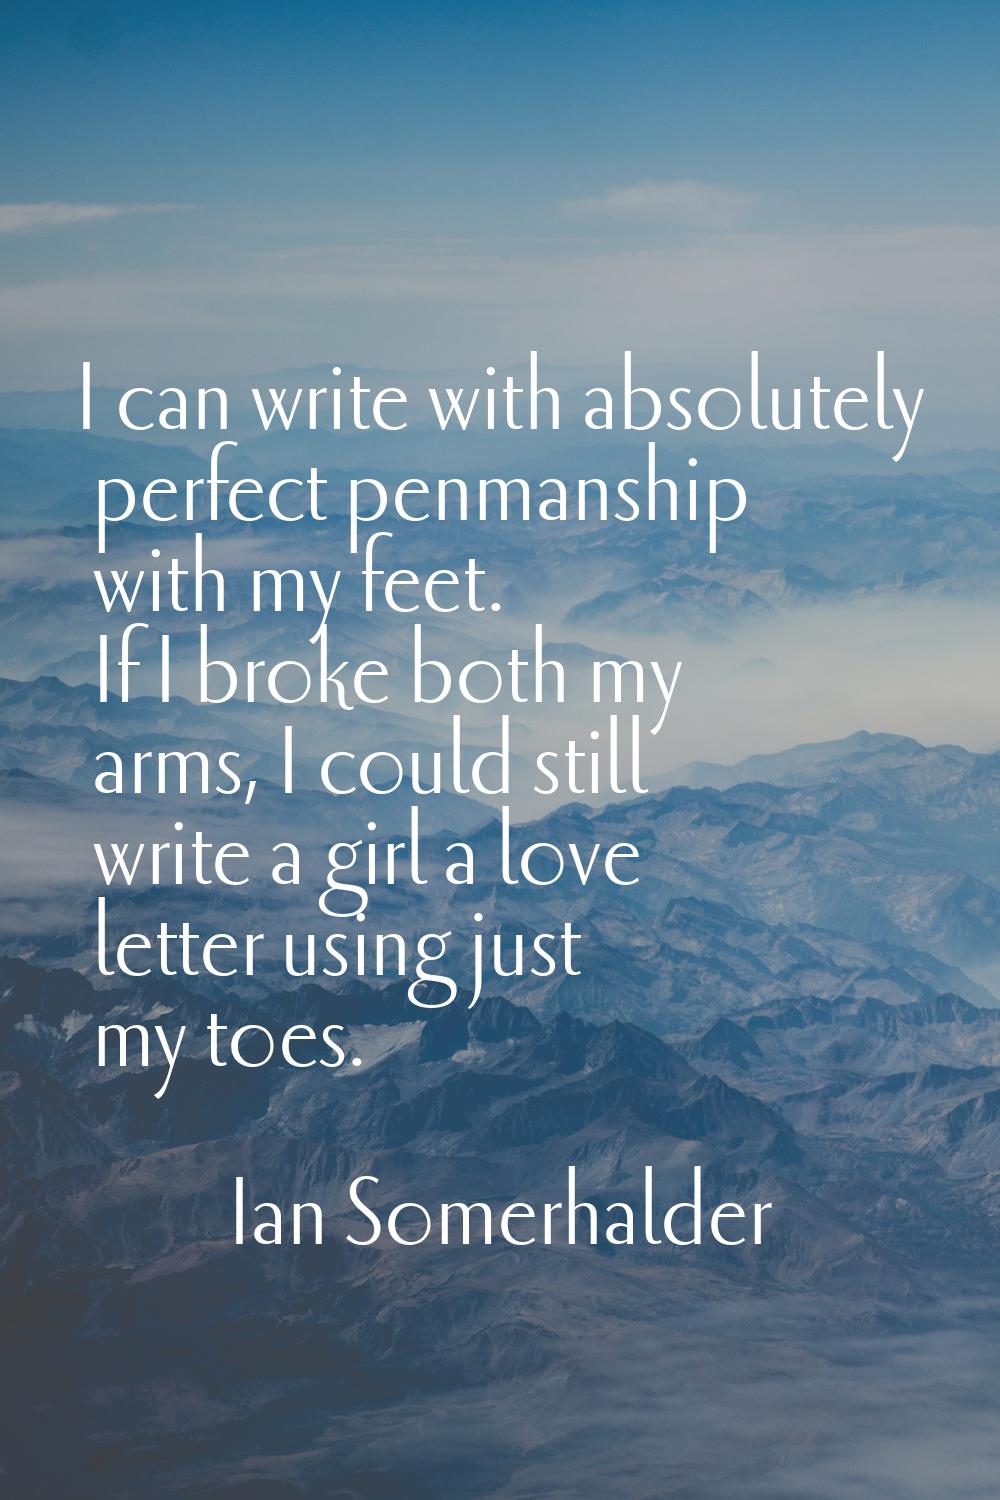 I can write with absolutely perfect penmanship with my feet. If I broke both my arms, I could still